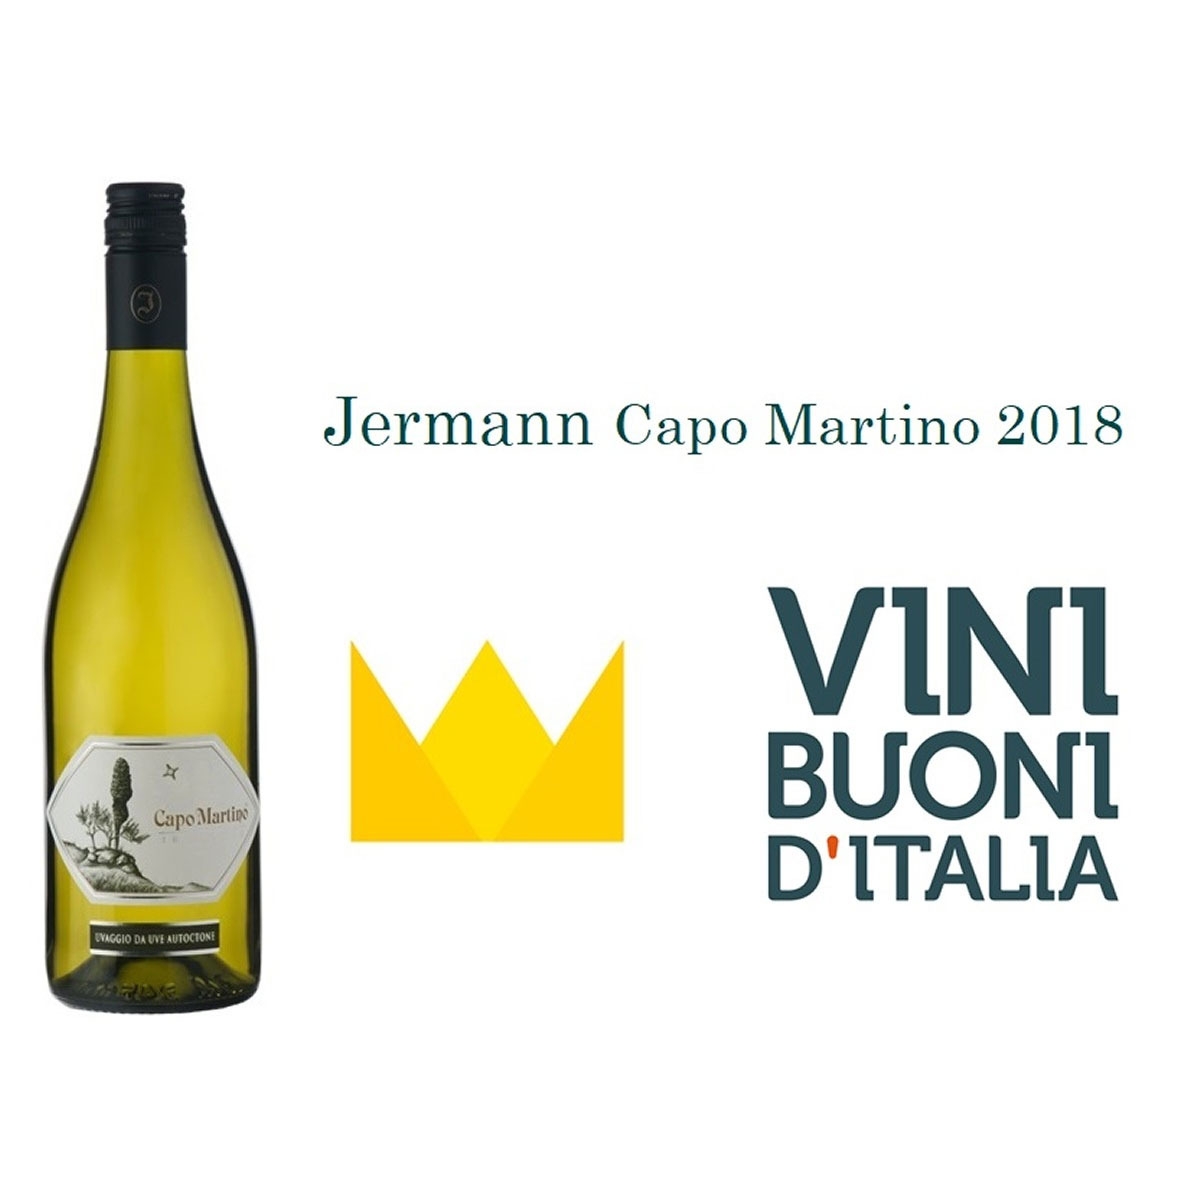 The Crown of the Guide Vini Buoni d'Italia for our Capo Martino 2018,  the highest recognition!